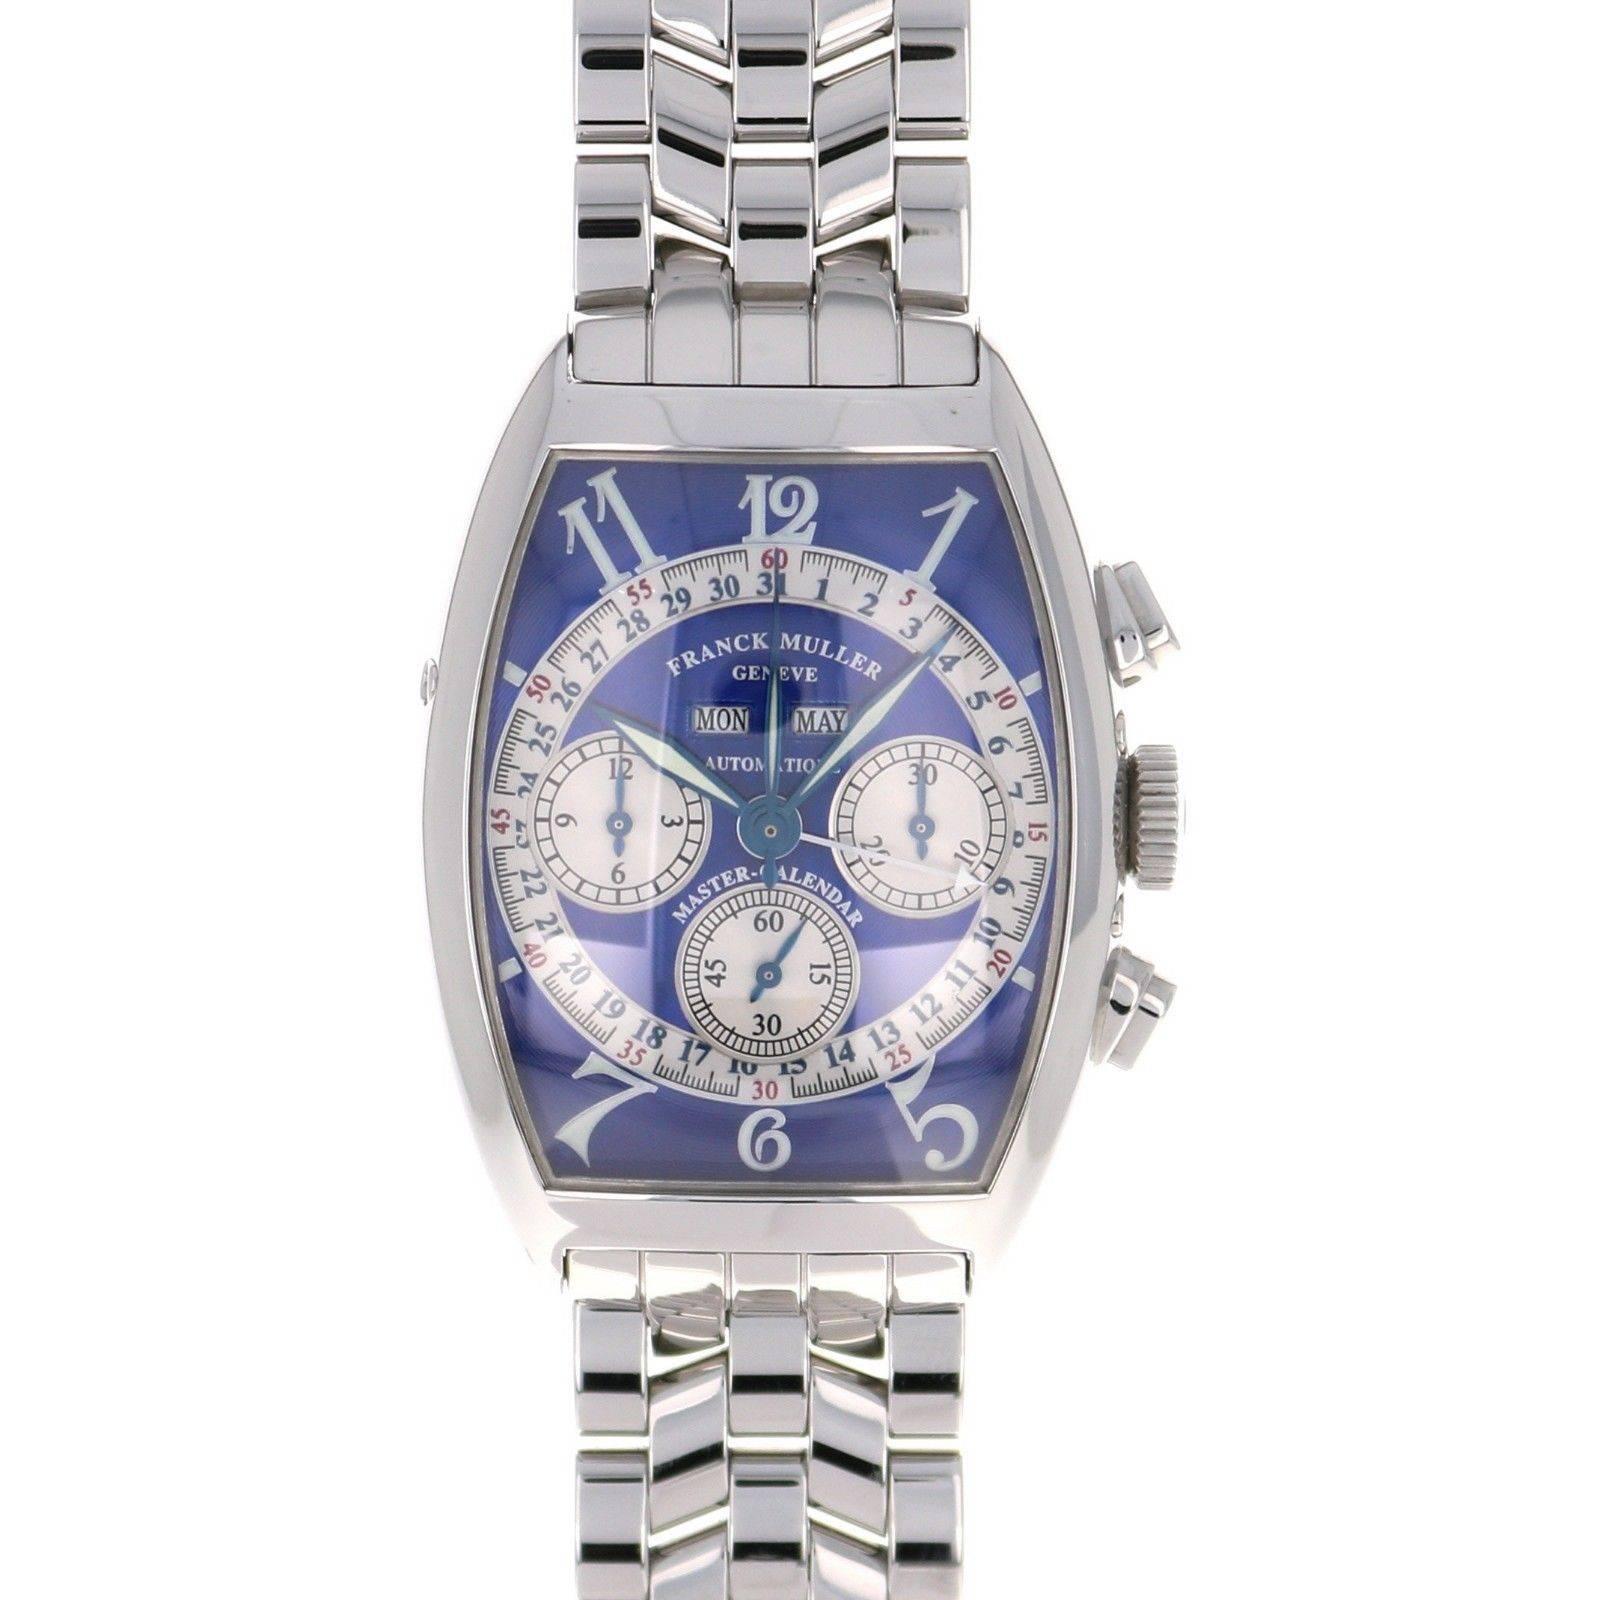 Franck Muller Stainless Steel Triple Calendar Chronograph Automatic Wristwatch 1